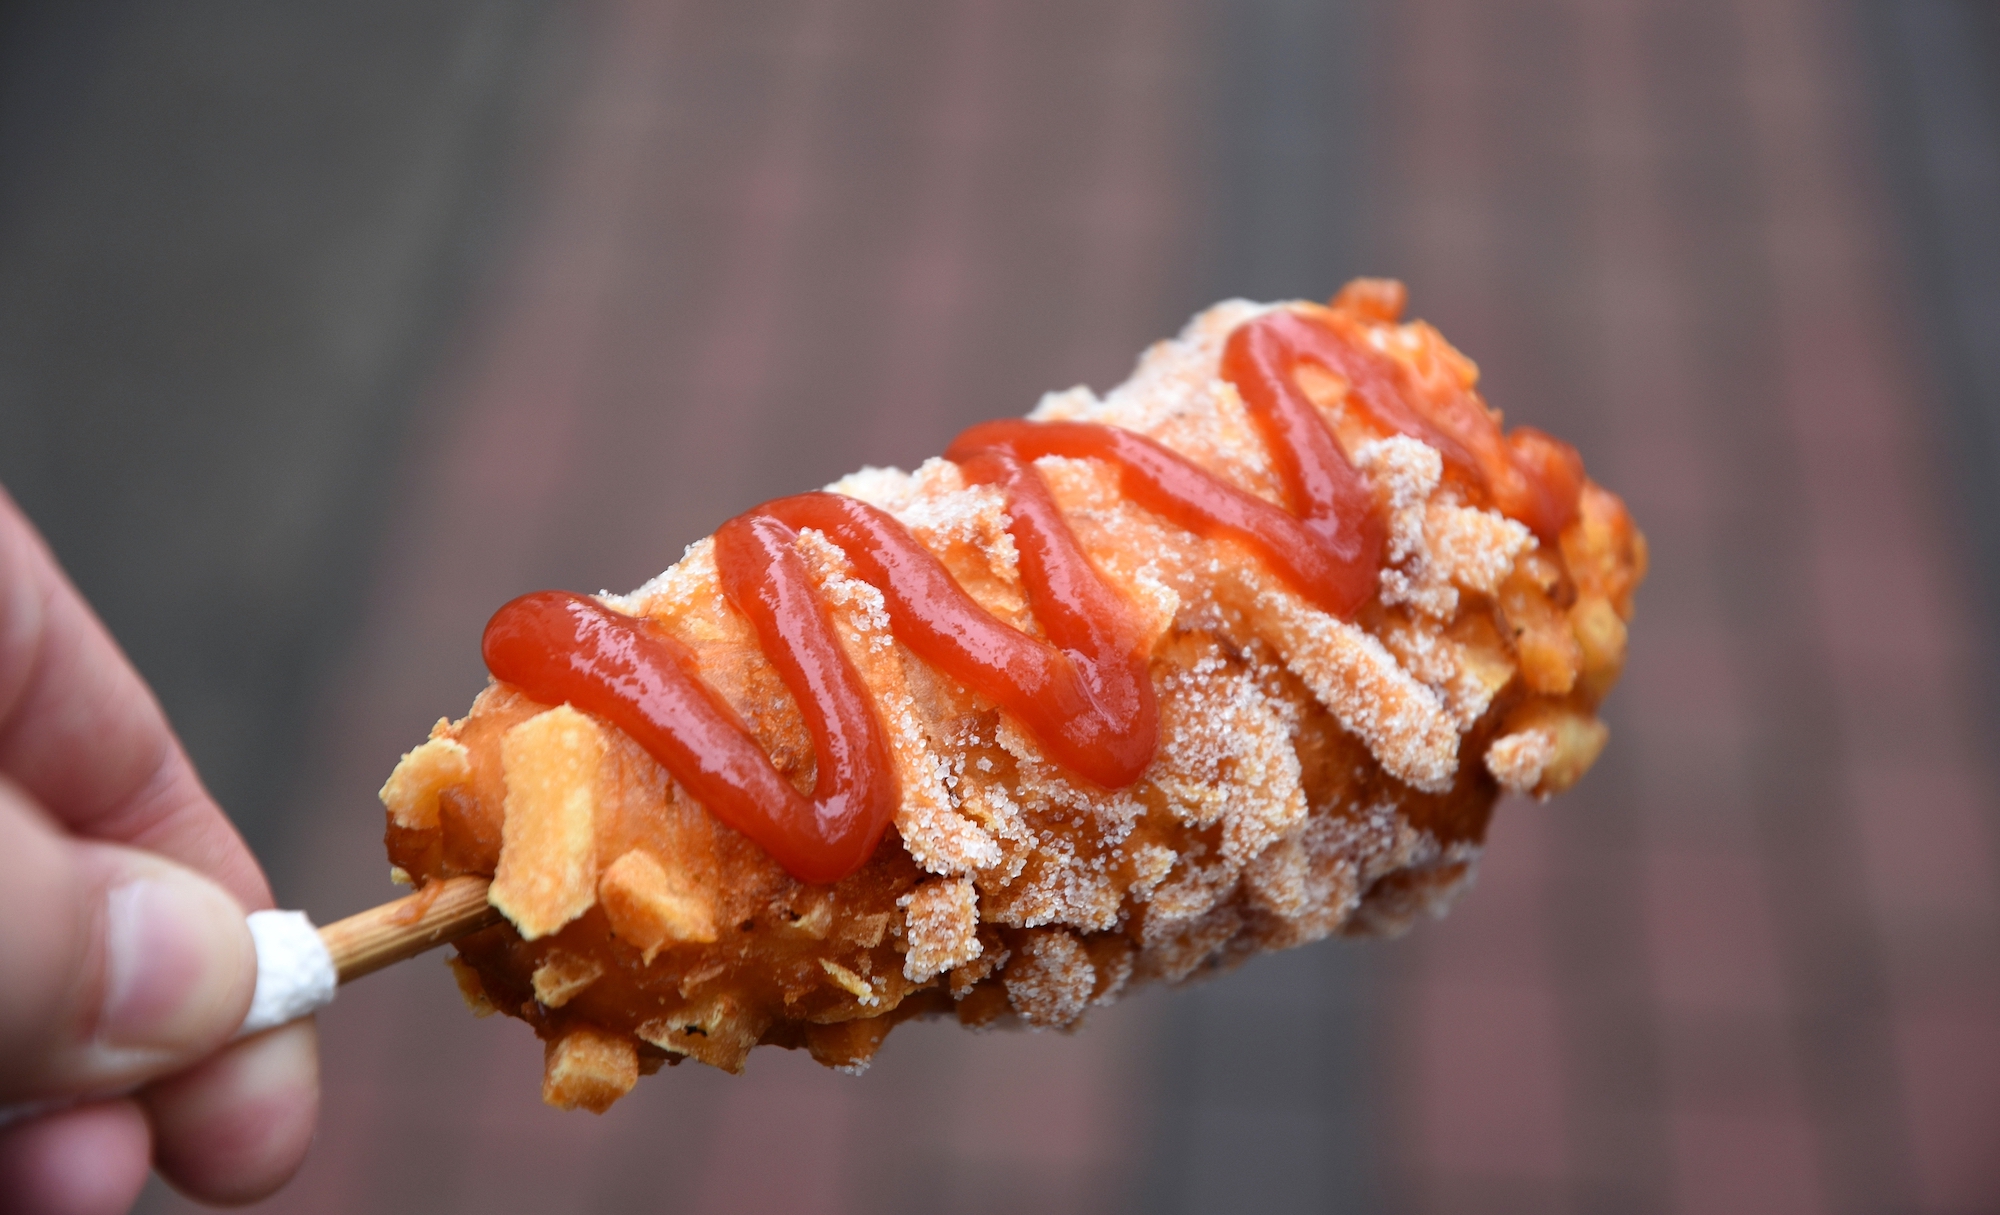 A hot dog on a stick covered with french fries and a squiggle of ketchup